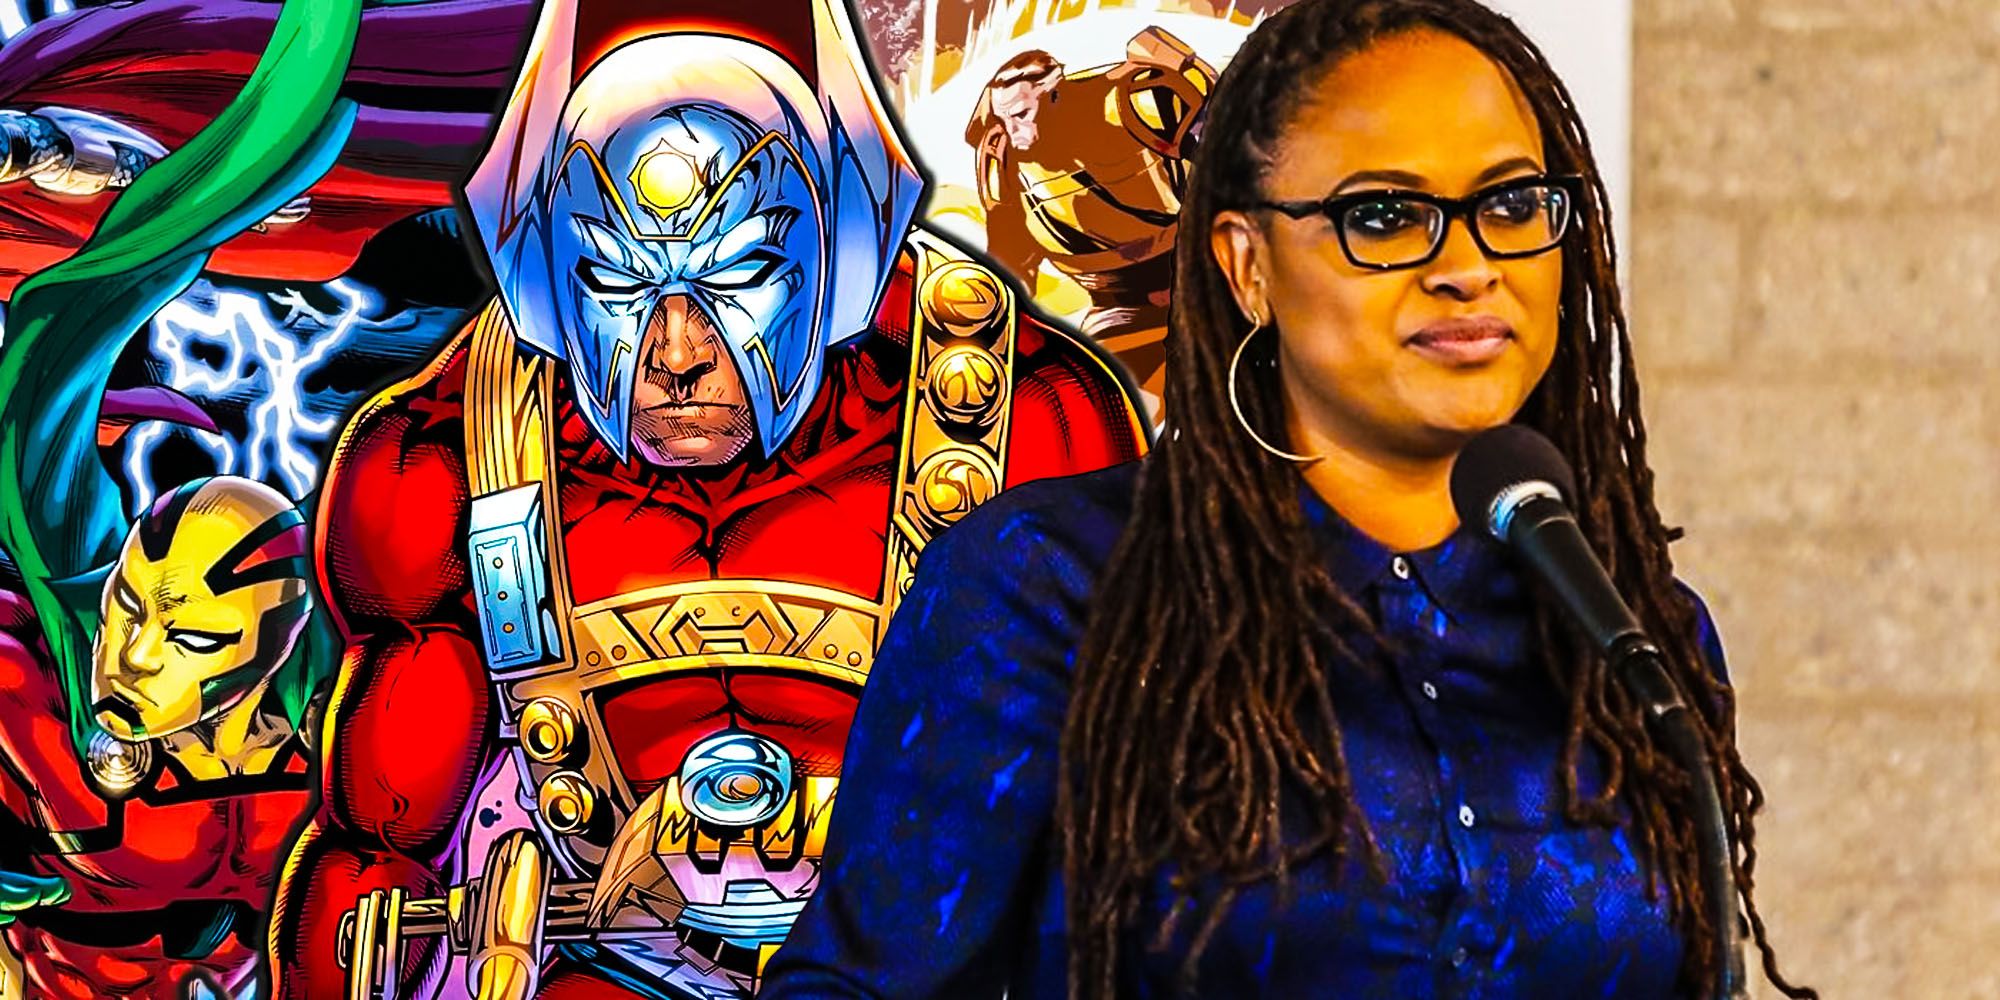 everything we know about DC's canceled New Gods movie